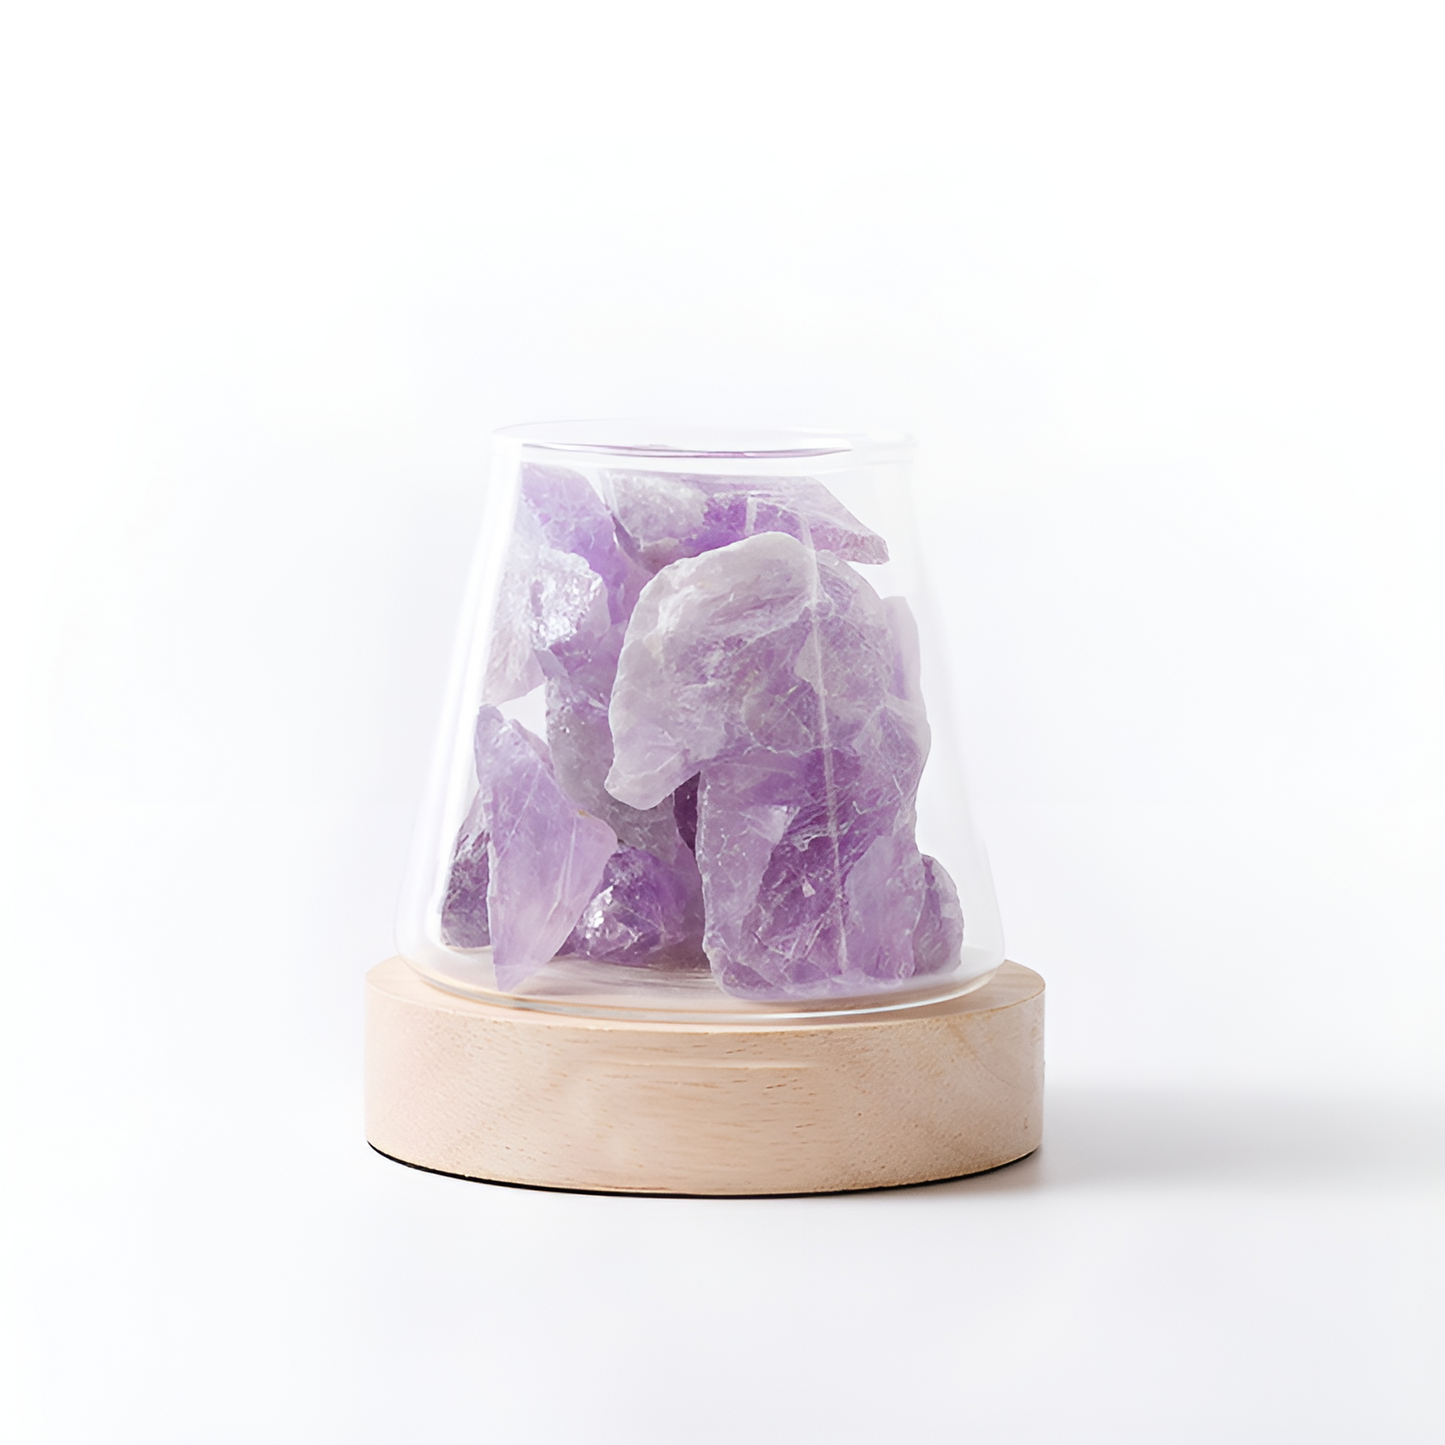 Crystal Healing Amethyst Crystal Oil Diffuser Protection Stone